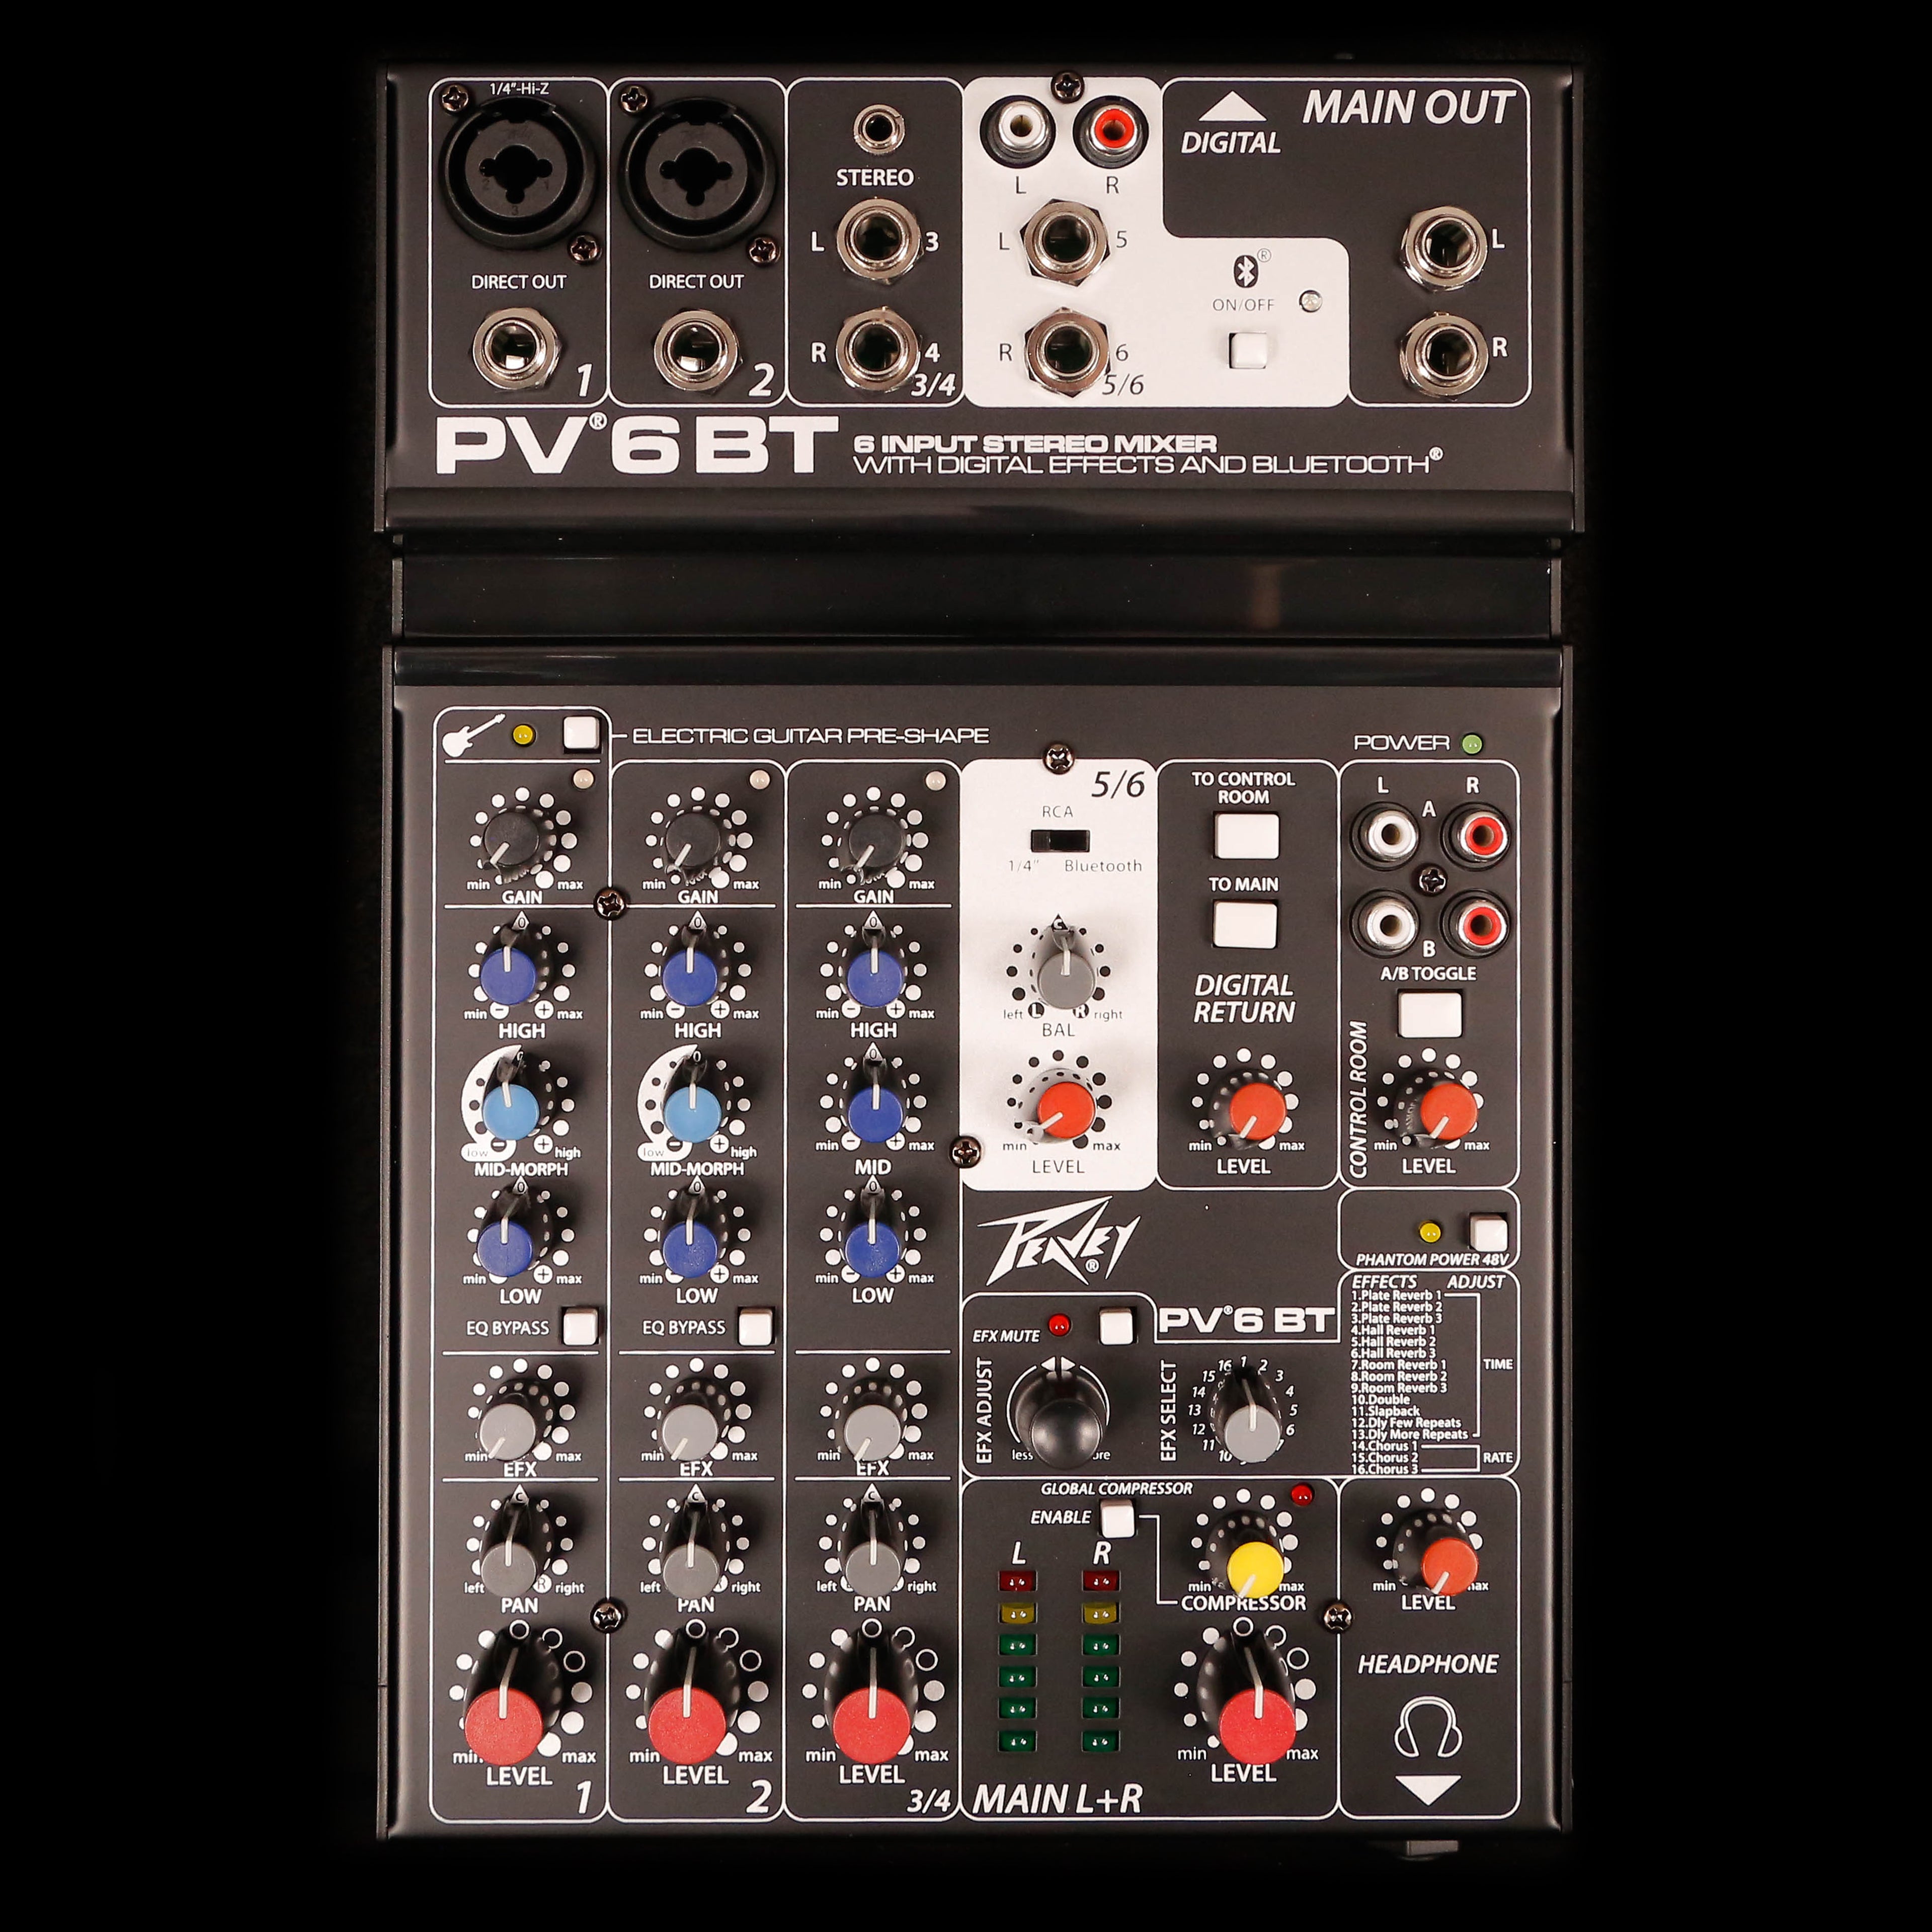 Peavey PV 10 AT Mixer with Auto-Tune and Bluetooth